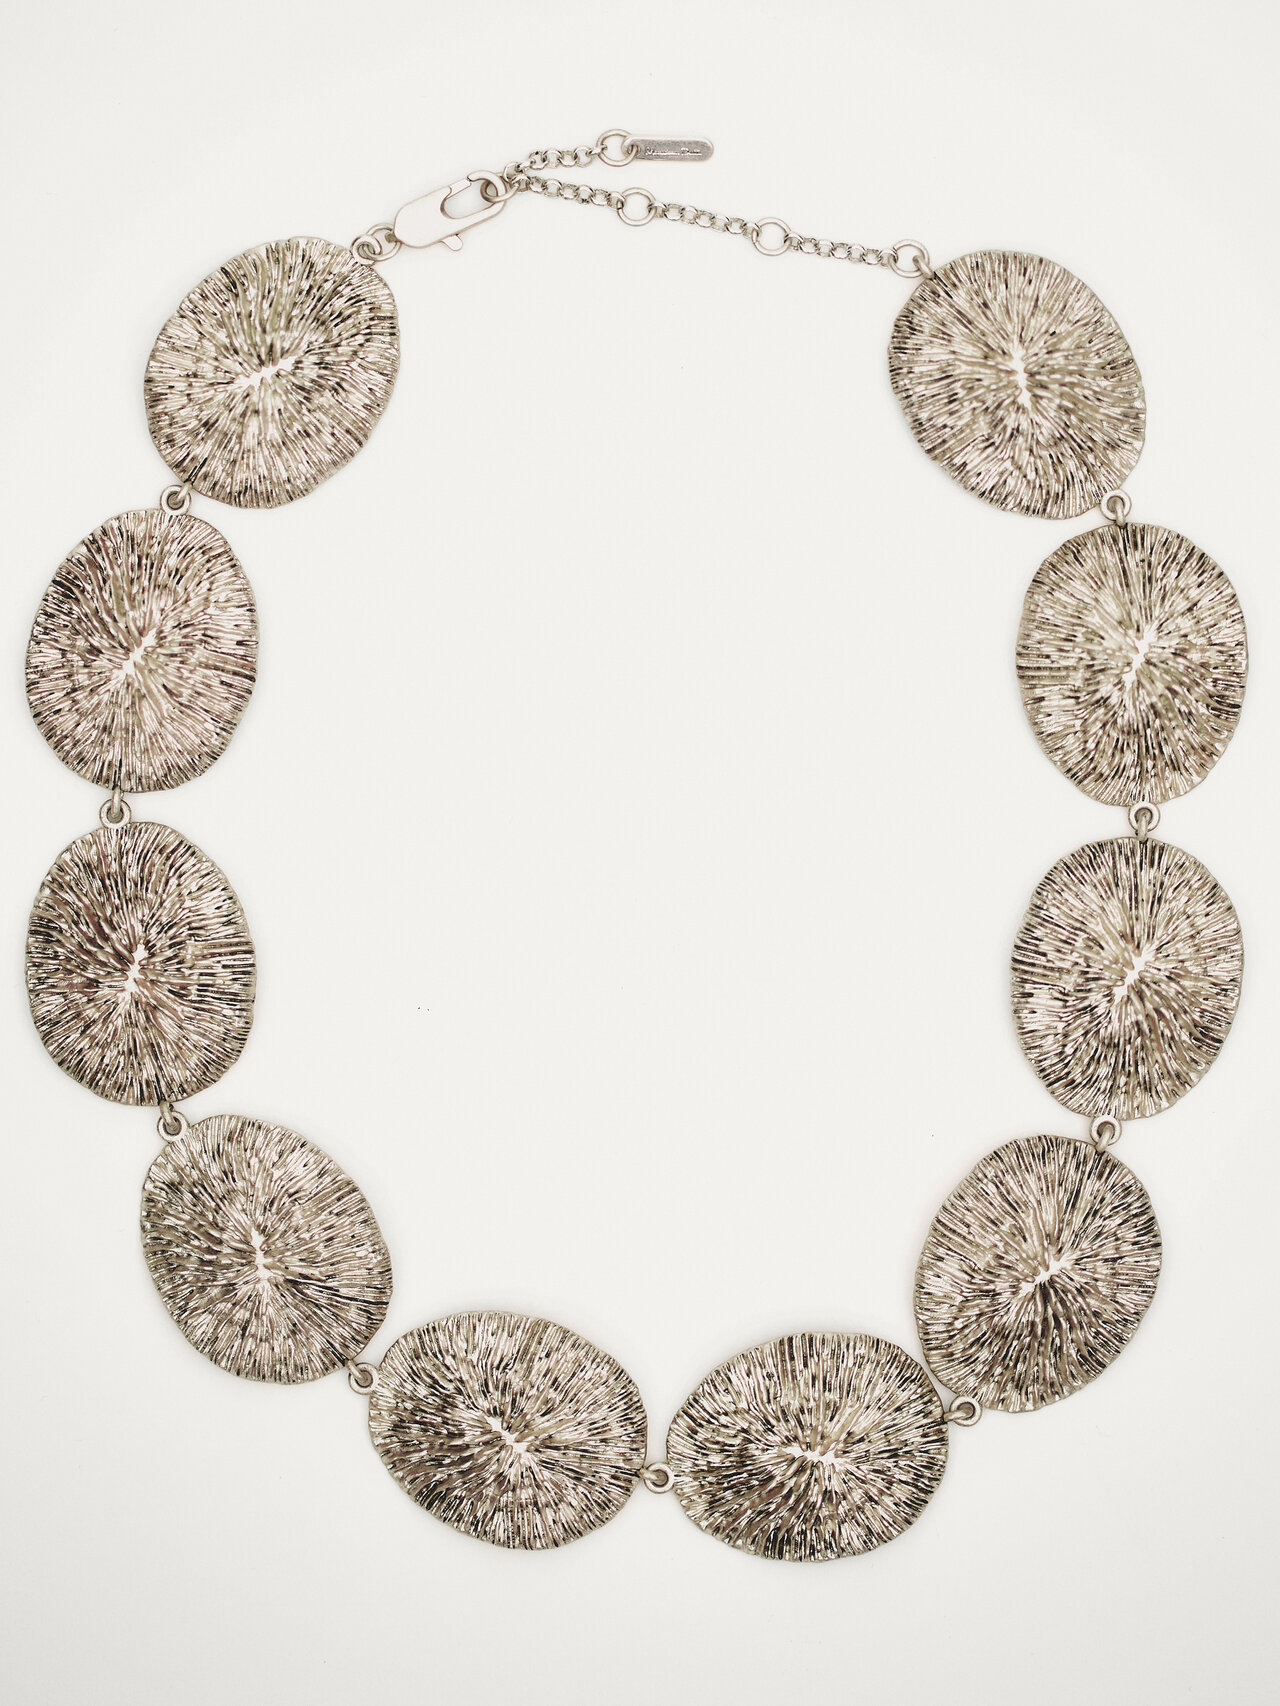 Necklace with oval textured pieces